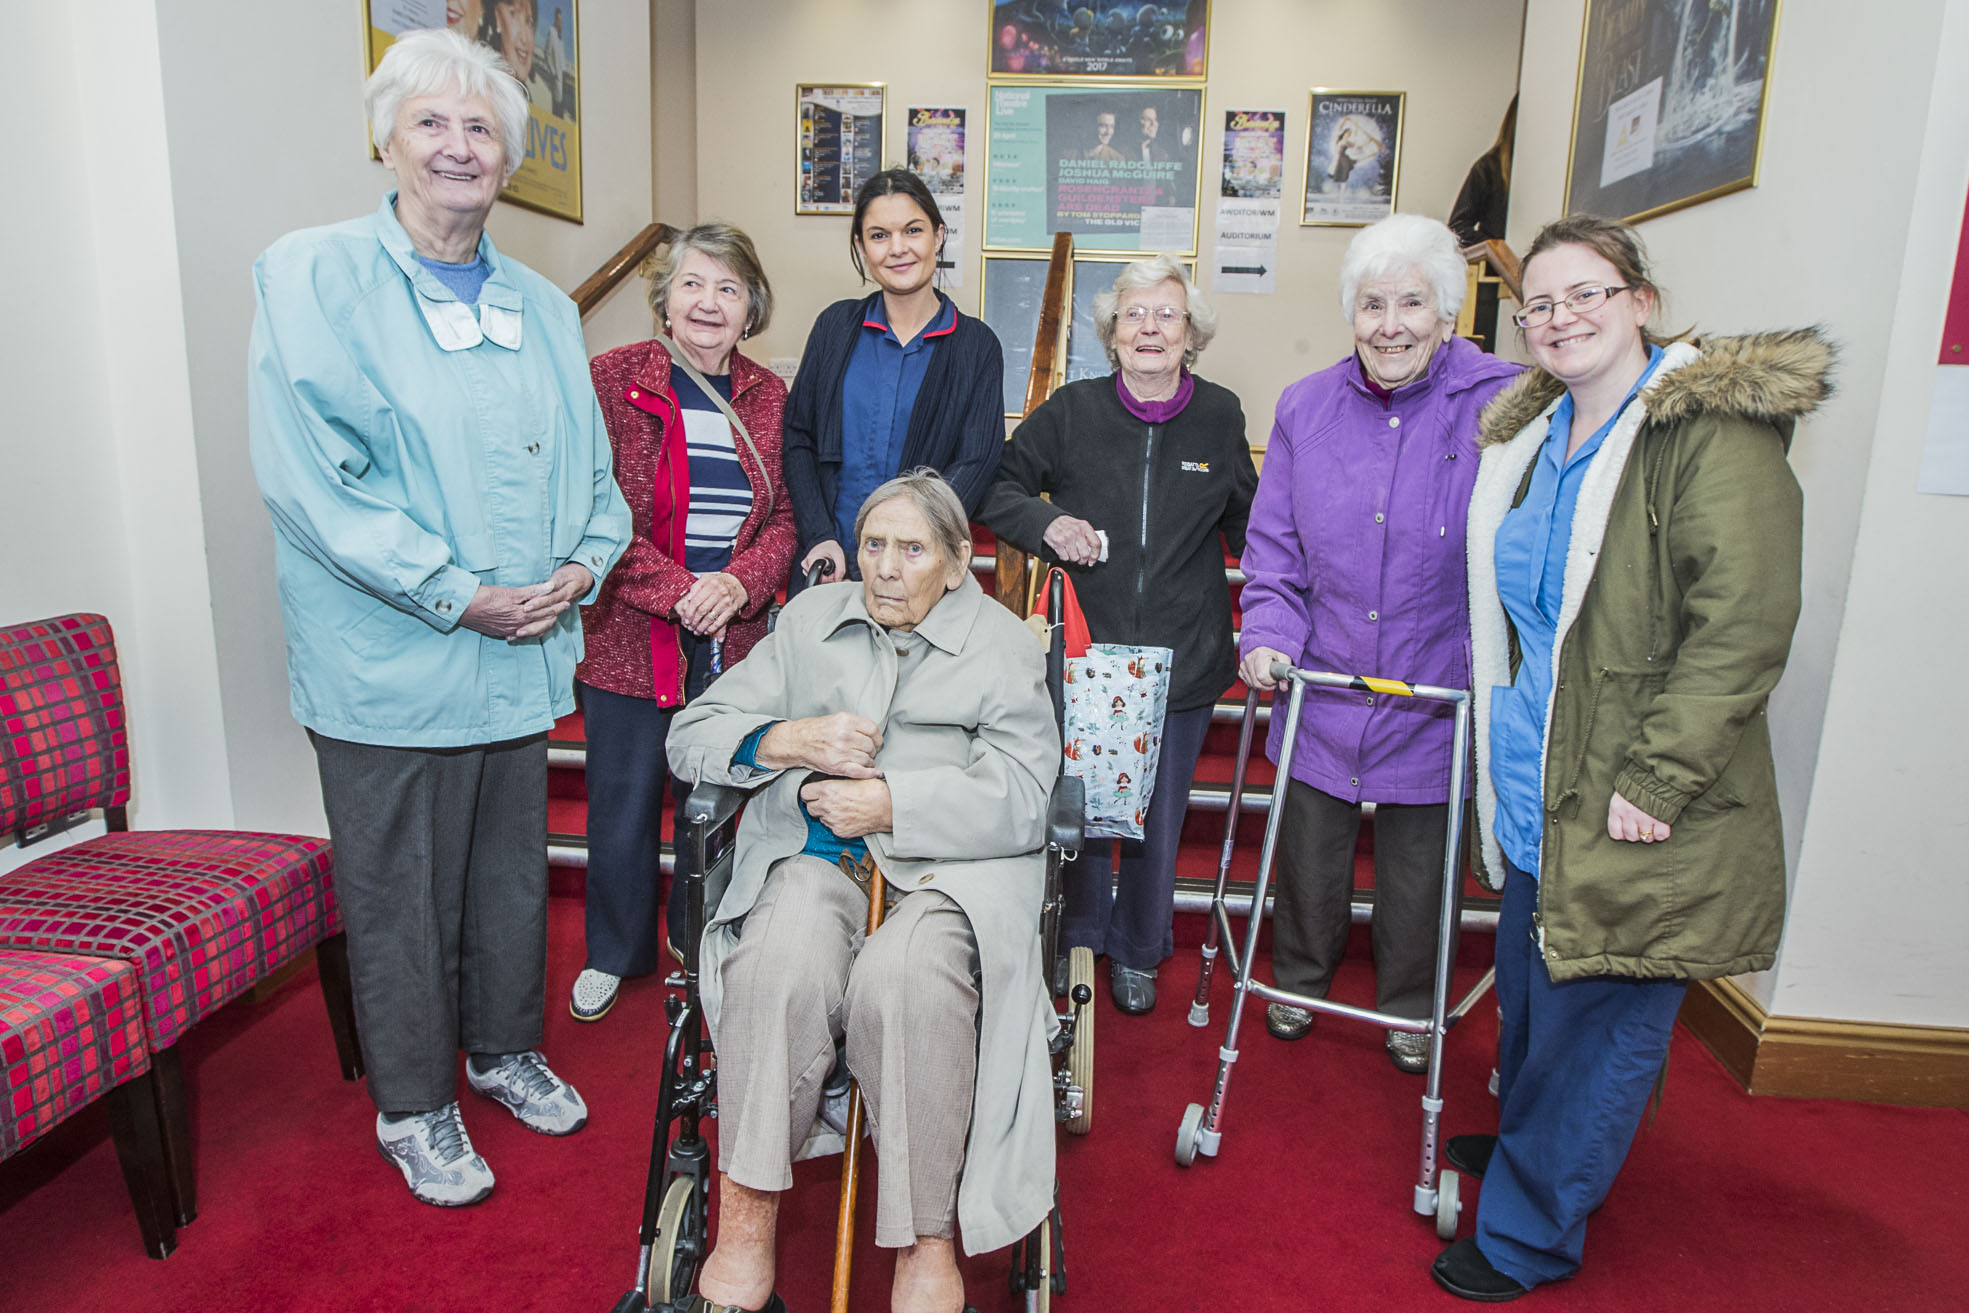 Film fans singing in the aisles at Theatr Colwyn’s dementia friendly screening